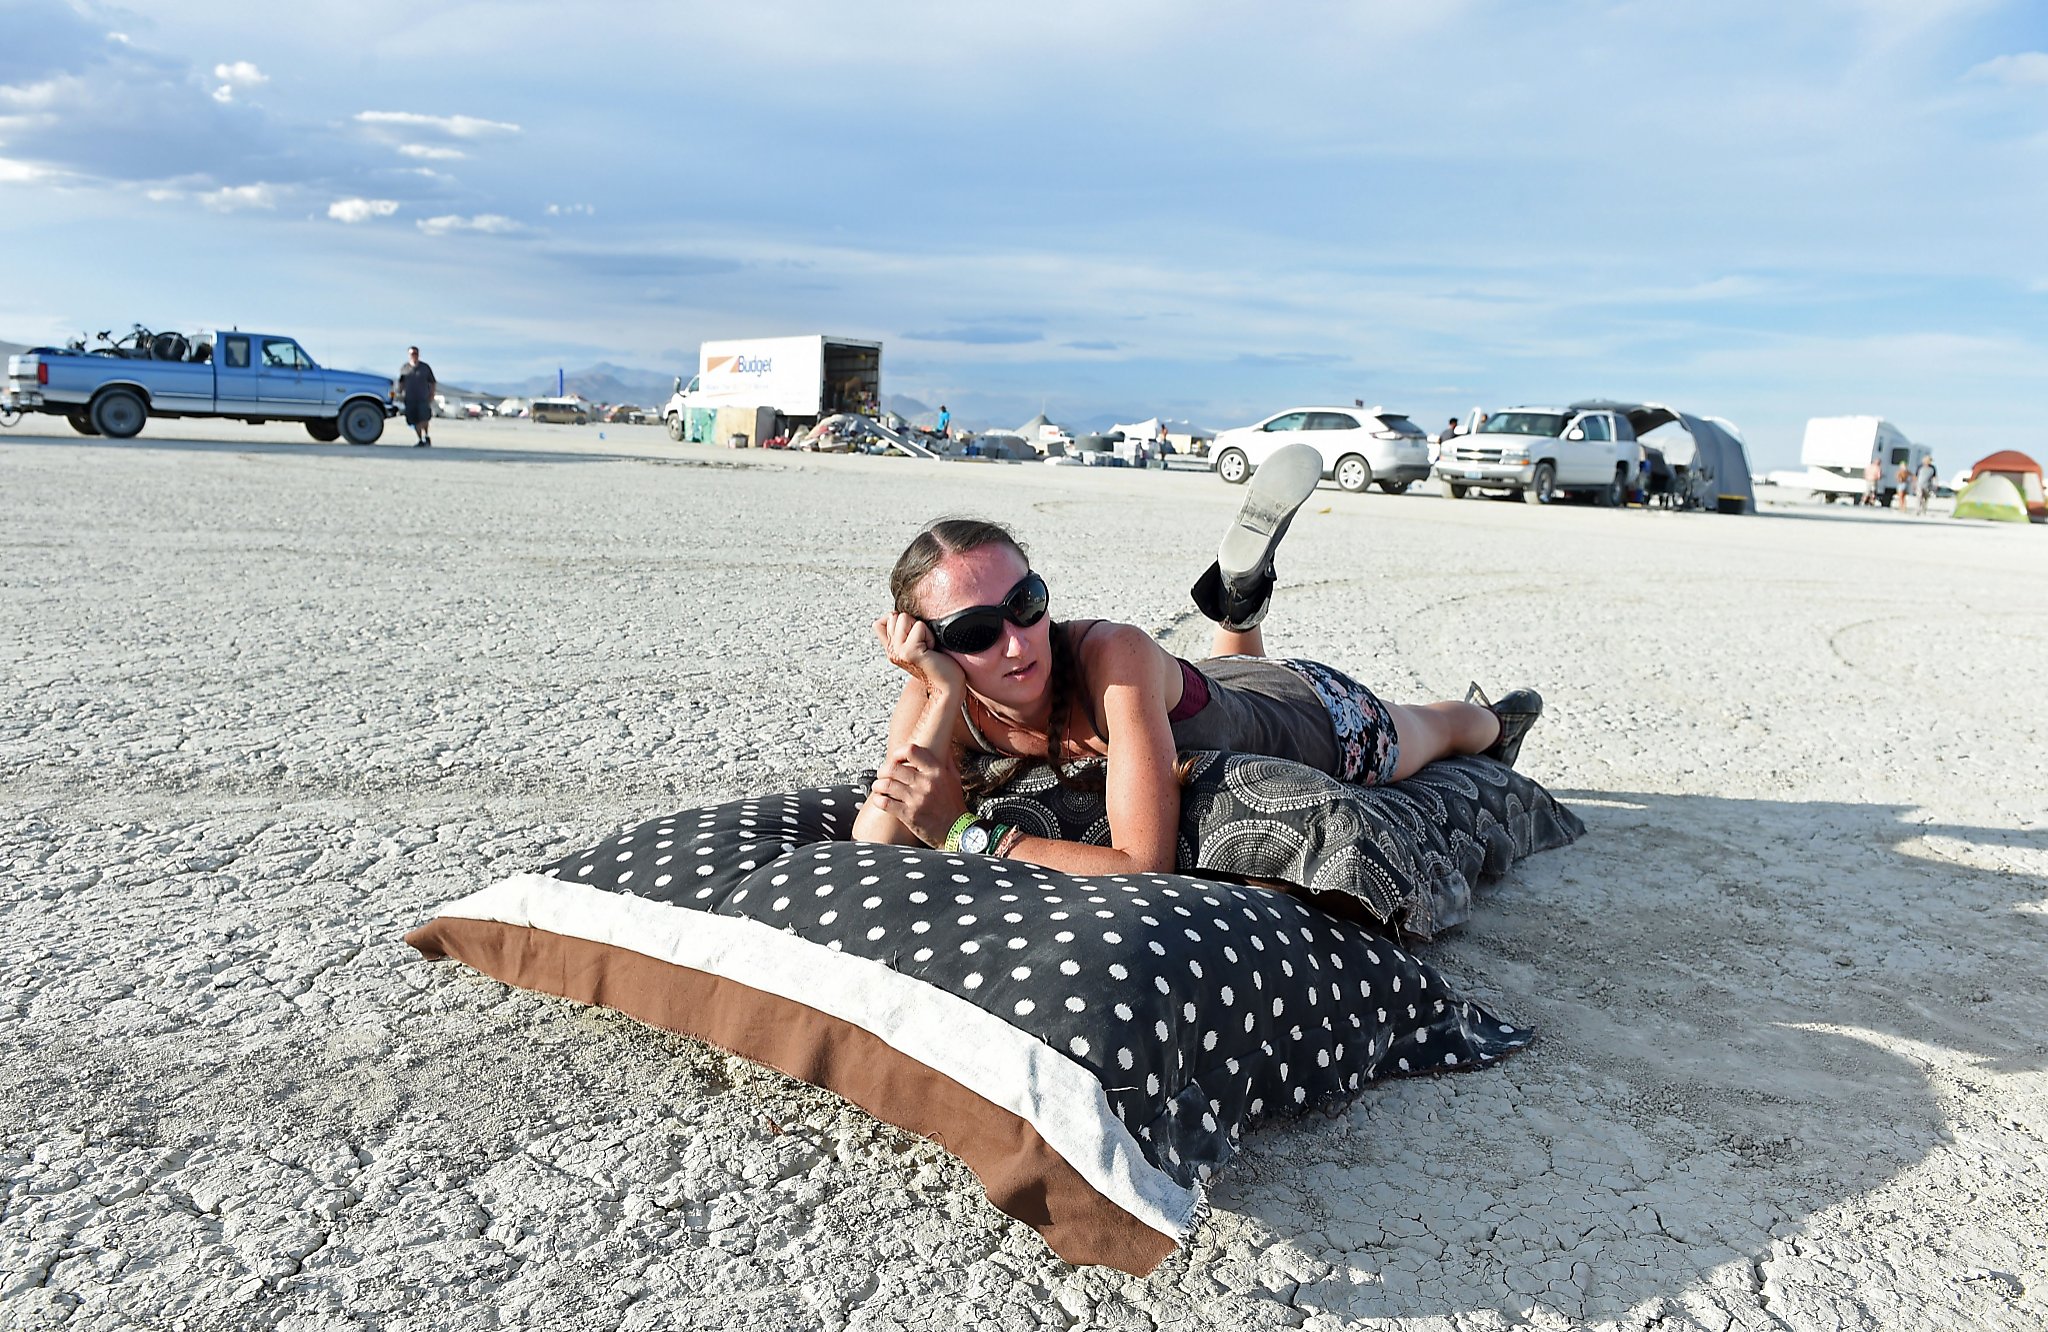 Is Burning Man planning a permanent community? pic